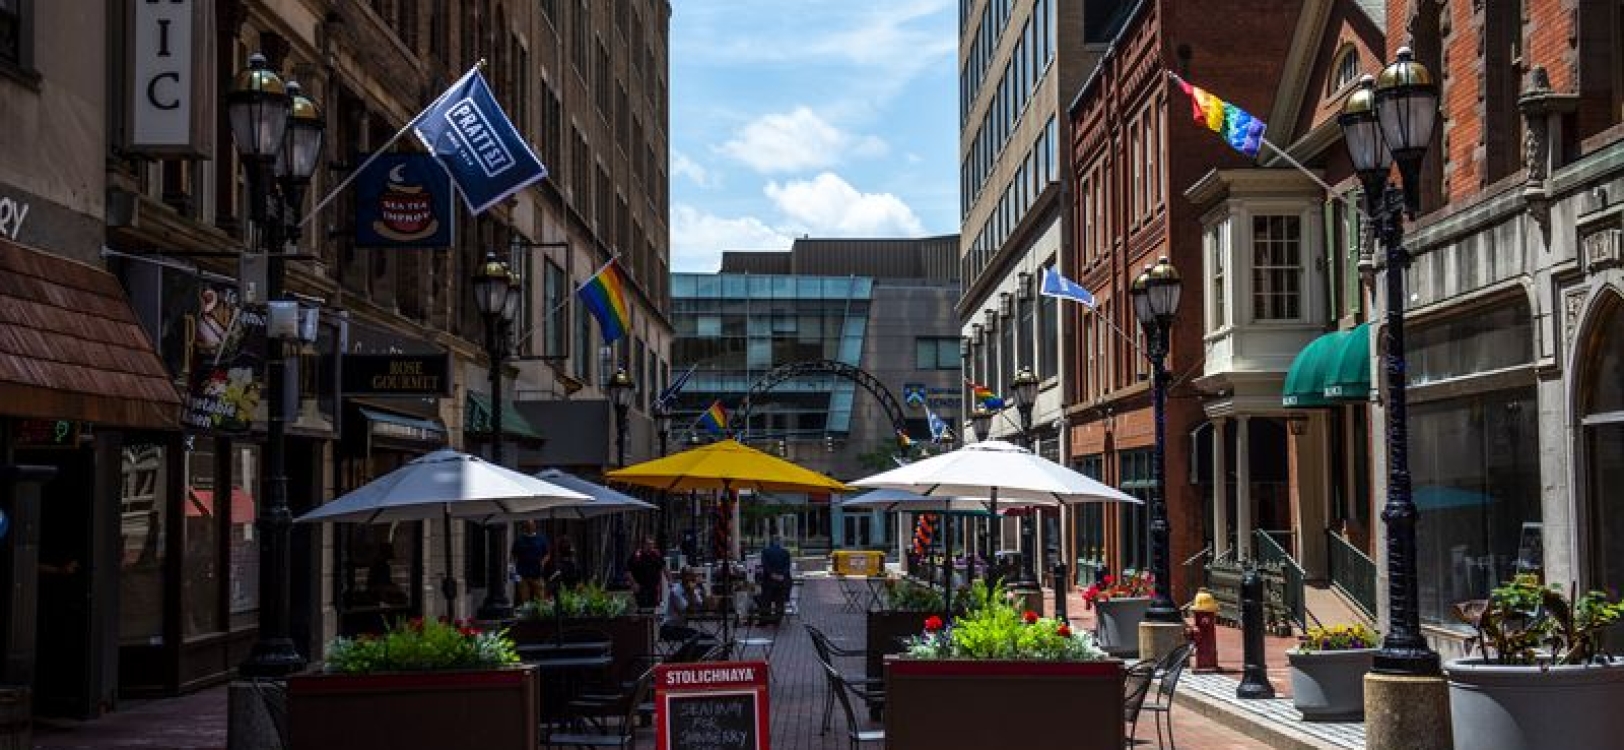 Sunny day on Pratt Street Patio with tables and chairs set up from restaurants.